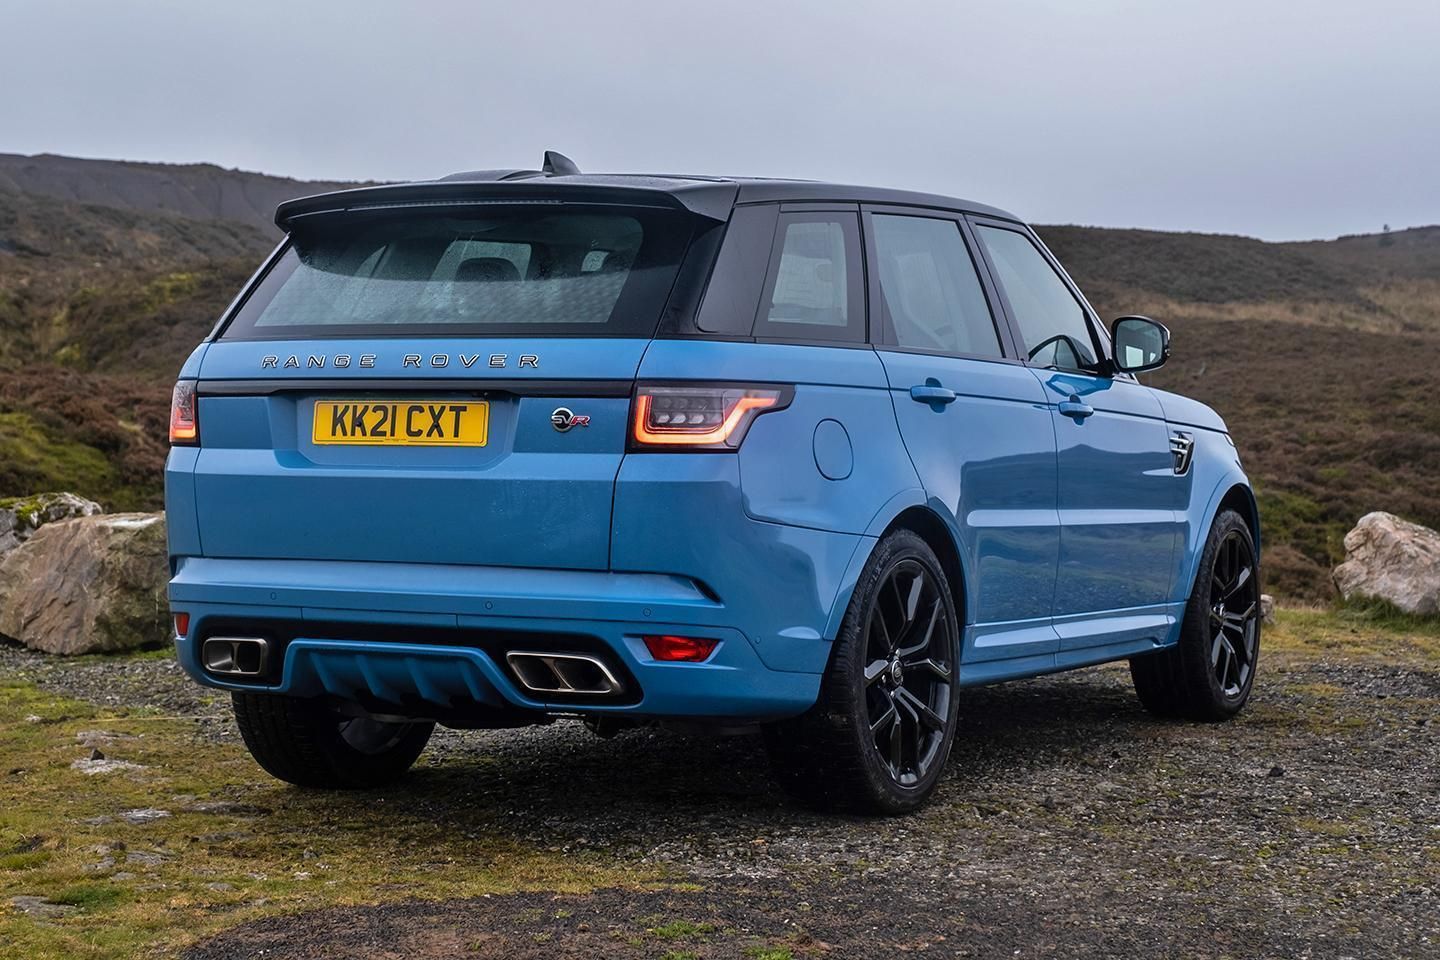 575-HP Range Rover Sport SVR Ultimae is the Fastest, Most Powerful SUV Land  Rover Sells